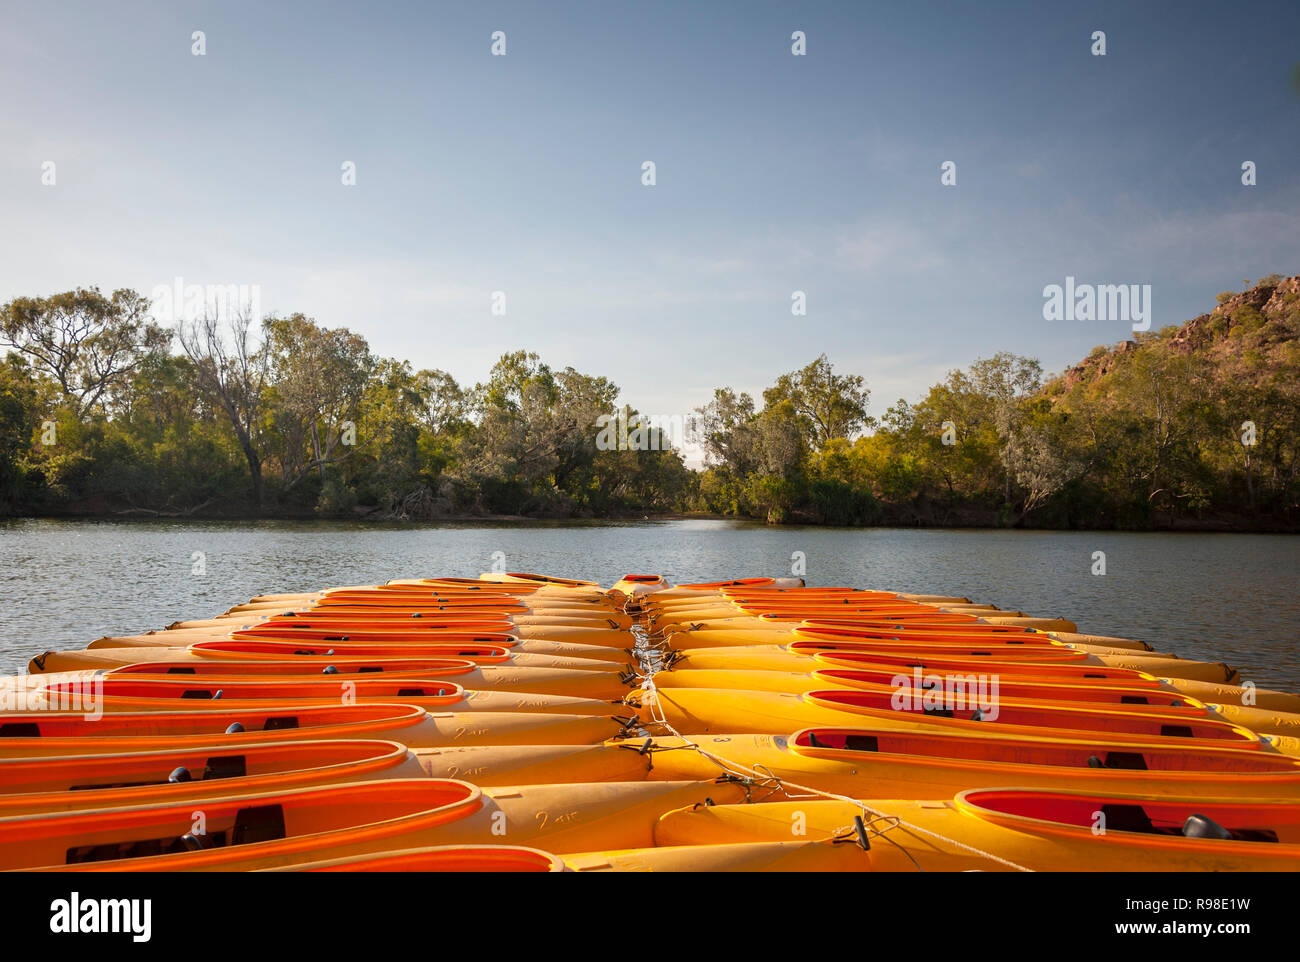 Canoes for hire creating a colorful pattern against the river, Katherine Gorge, Northern Territory Australia Stock Photo